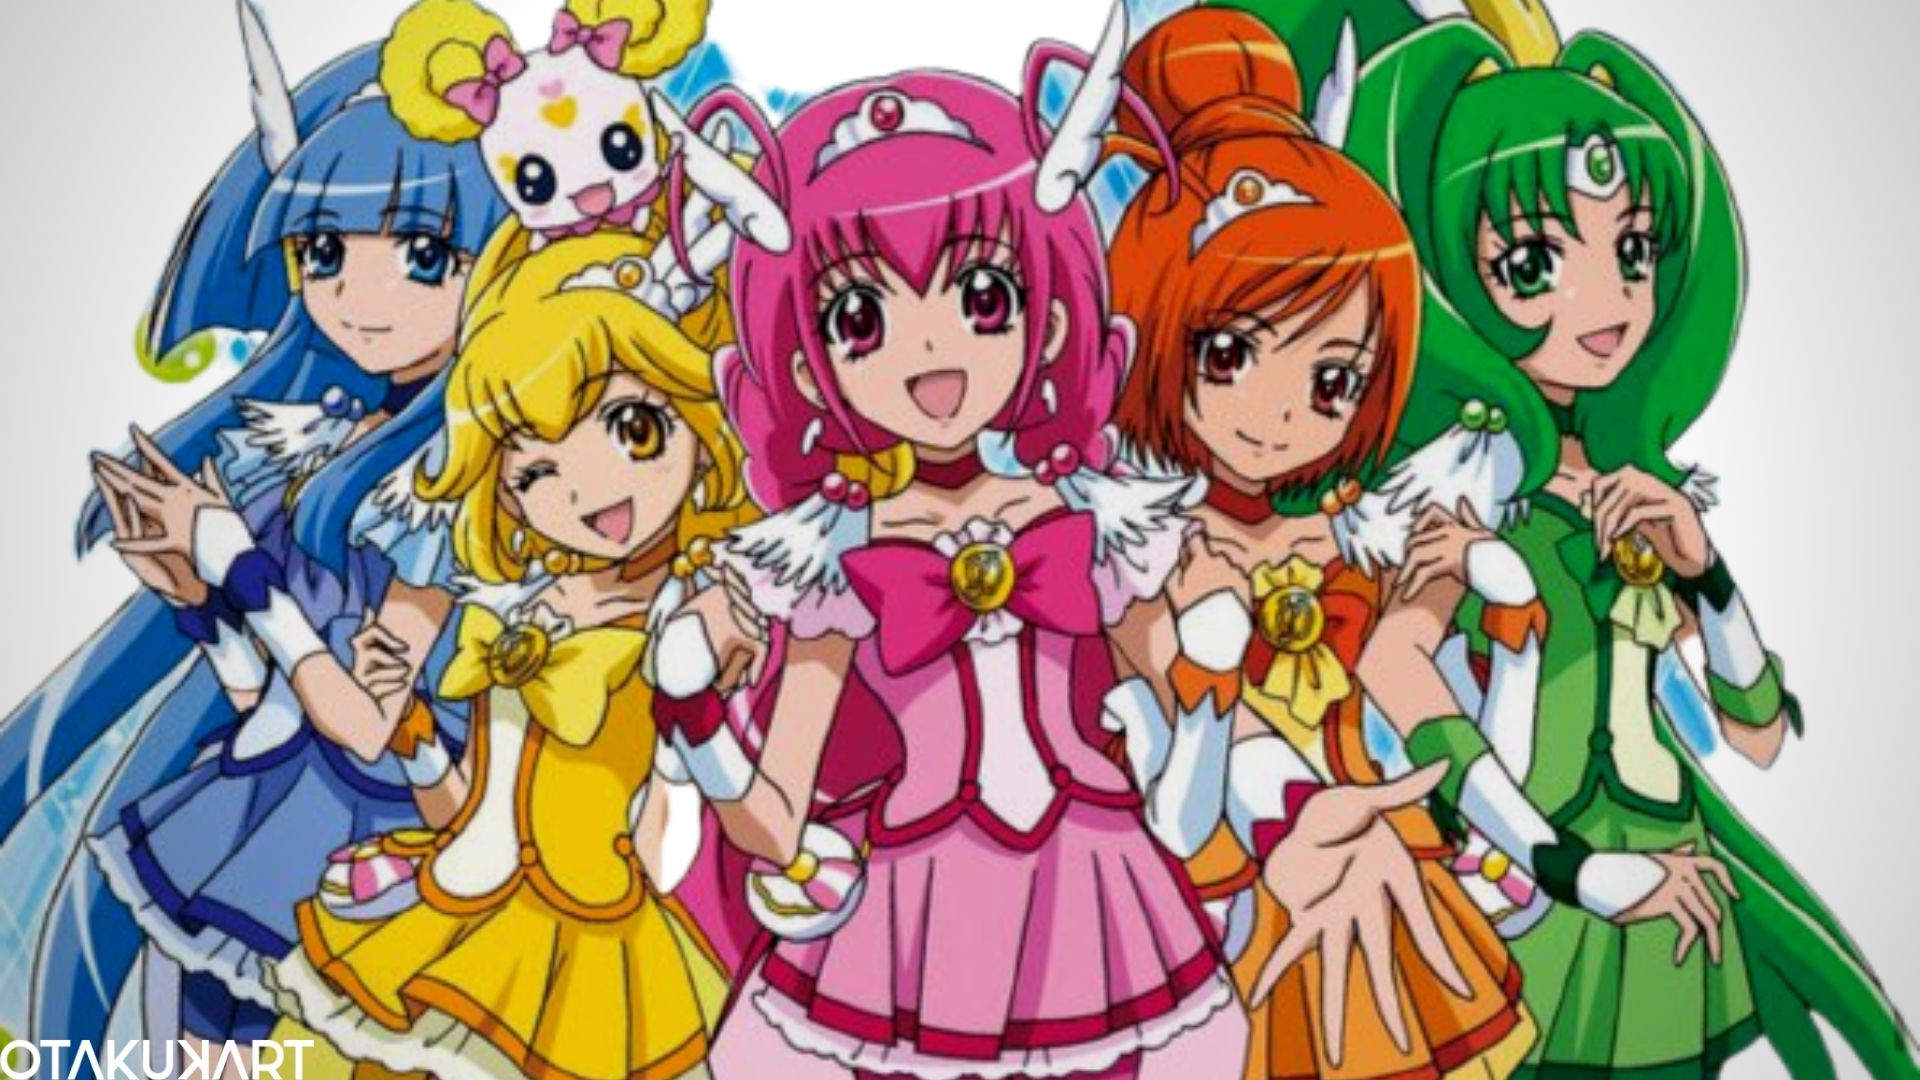 10 Most Similar Anime to Tokyo Mew Mew That You Should Check Out